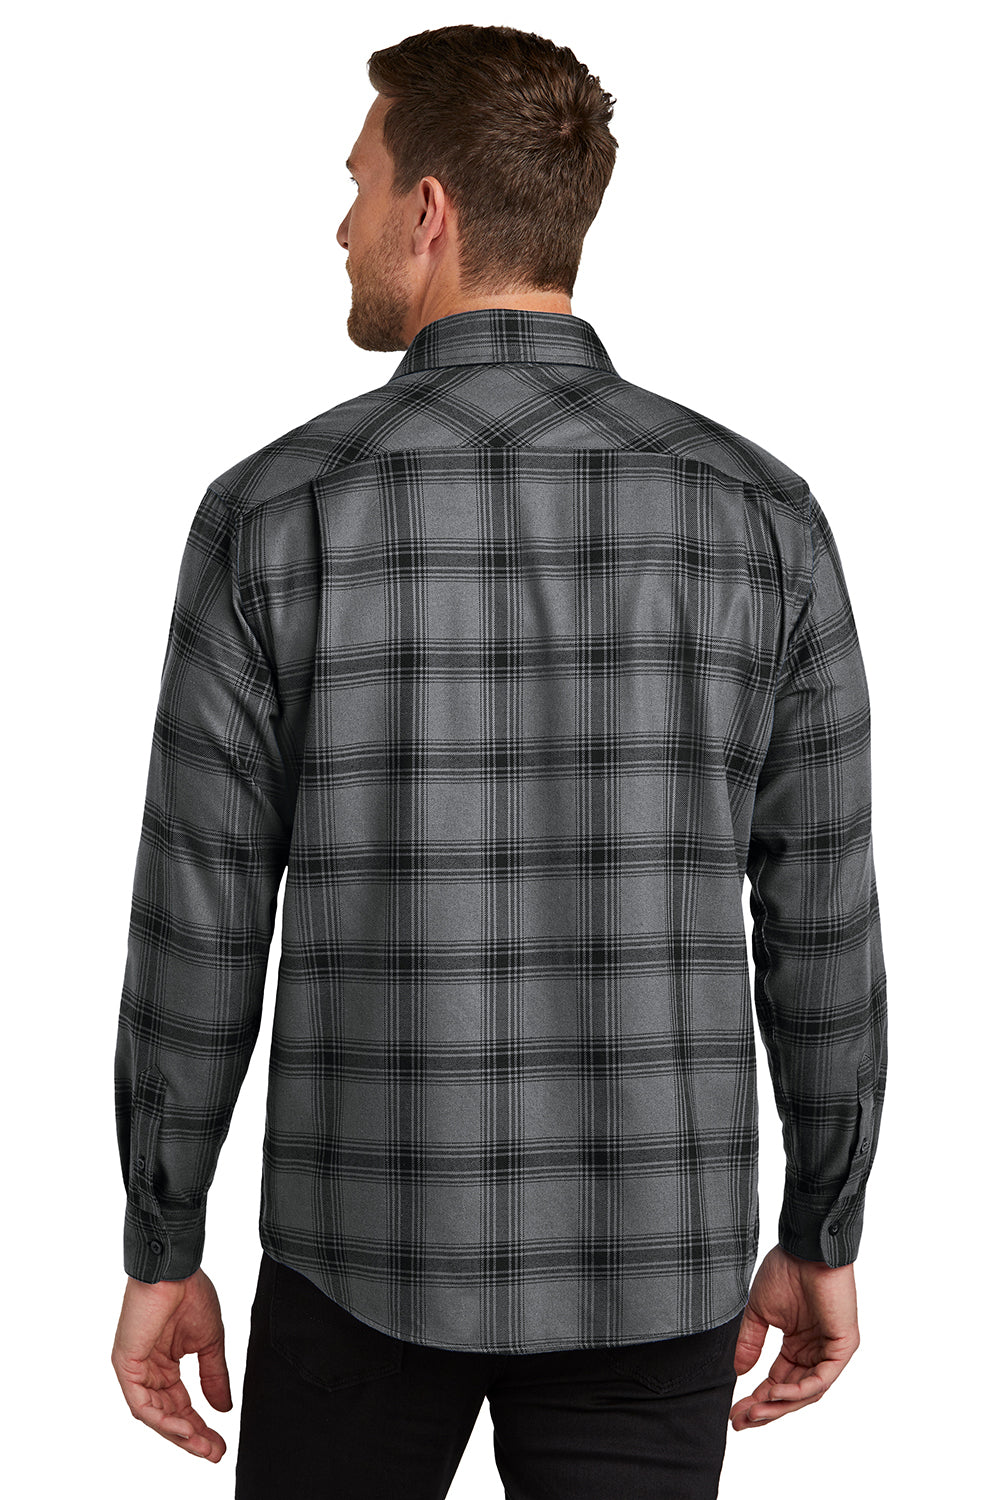 Port Authority W668 Mens Flannel Long Sleeve Button Down Shirt w/ Double Pockets Grey/Black Plaid Back